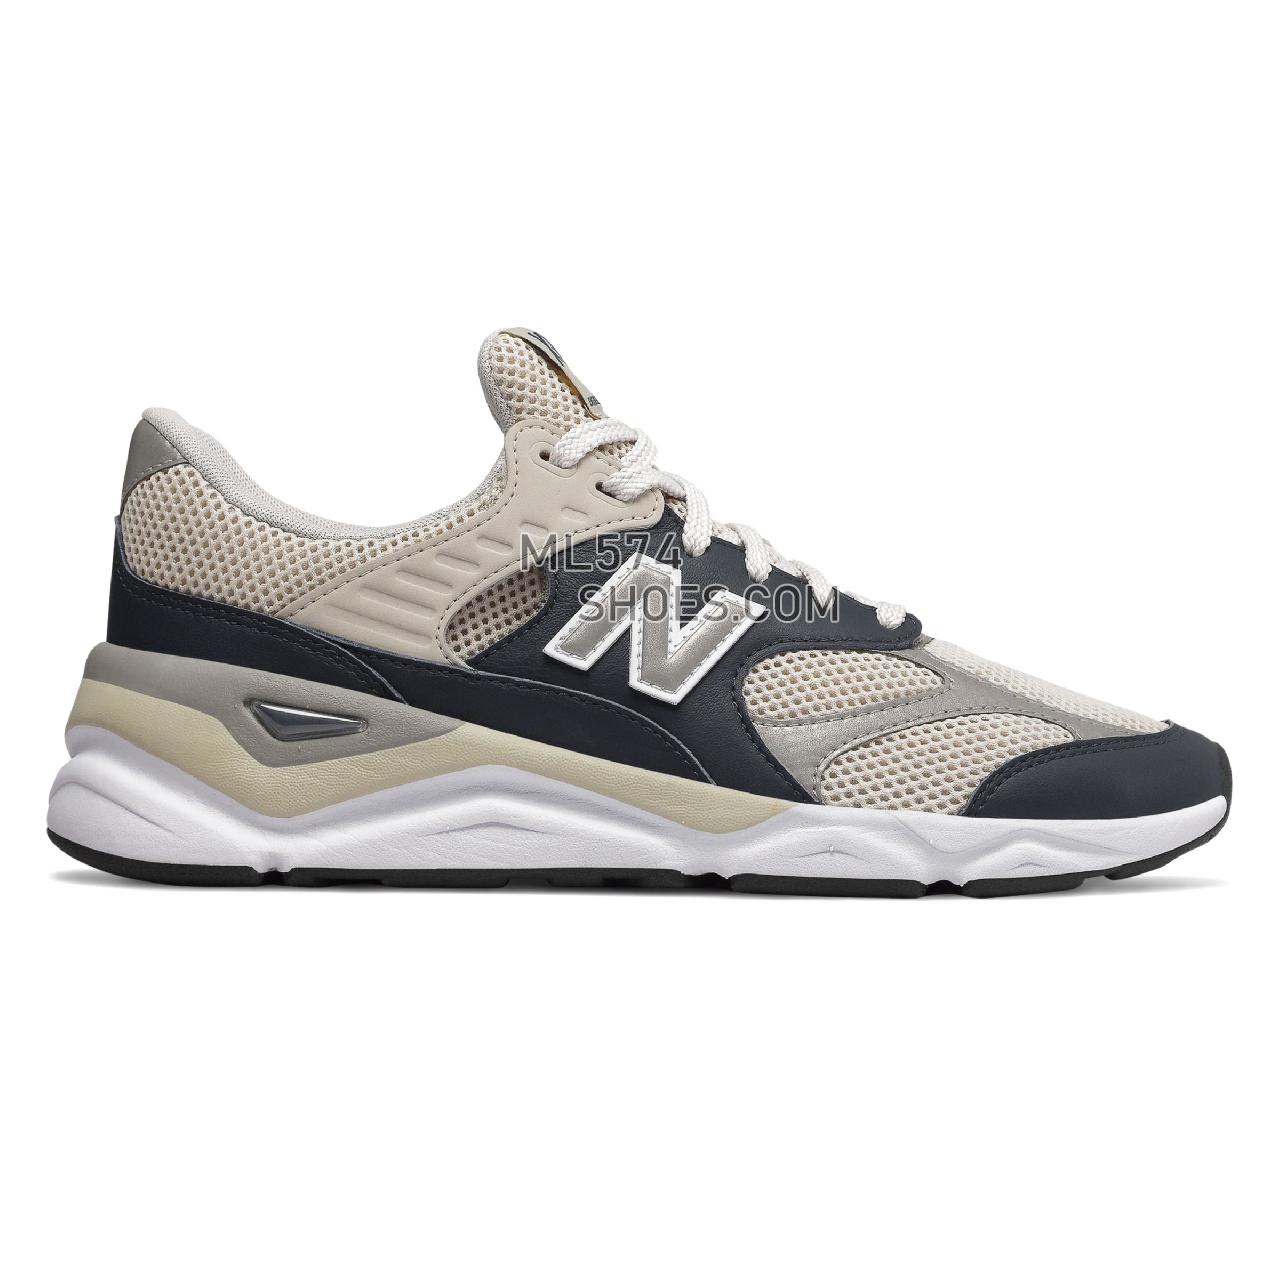 New Balance X-90 Reconstructed - Men's Sport Style Sneakers - Outerspace with Light Cliff Grey - MSX90RPC